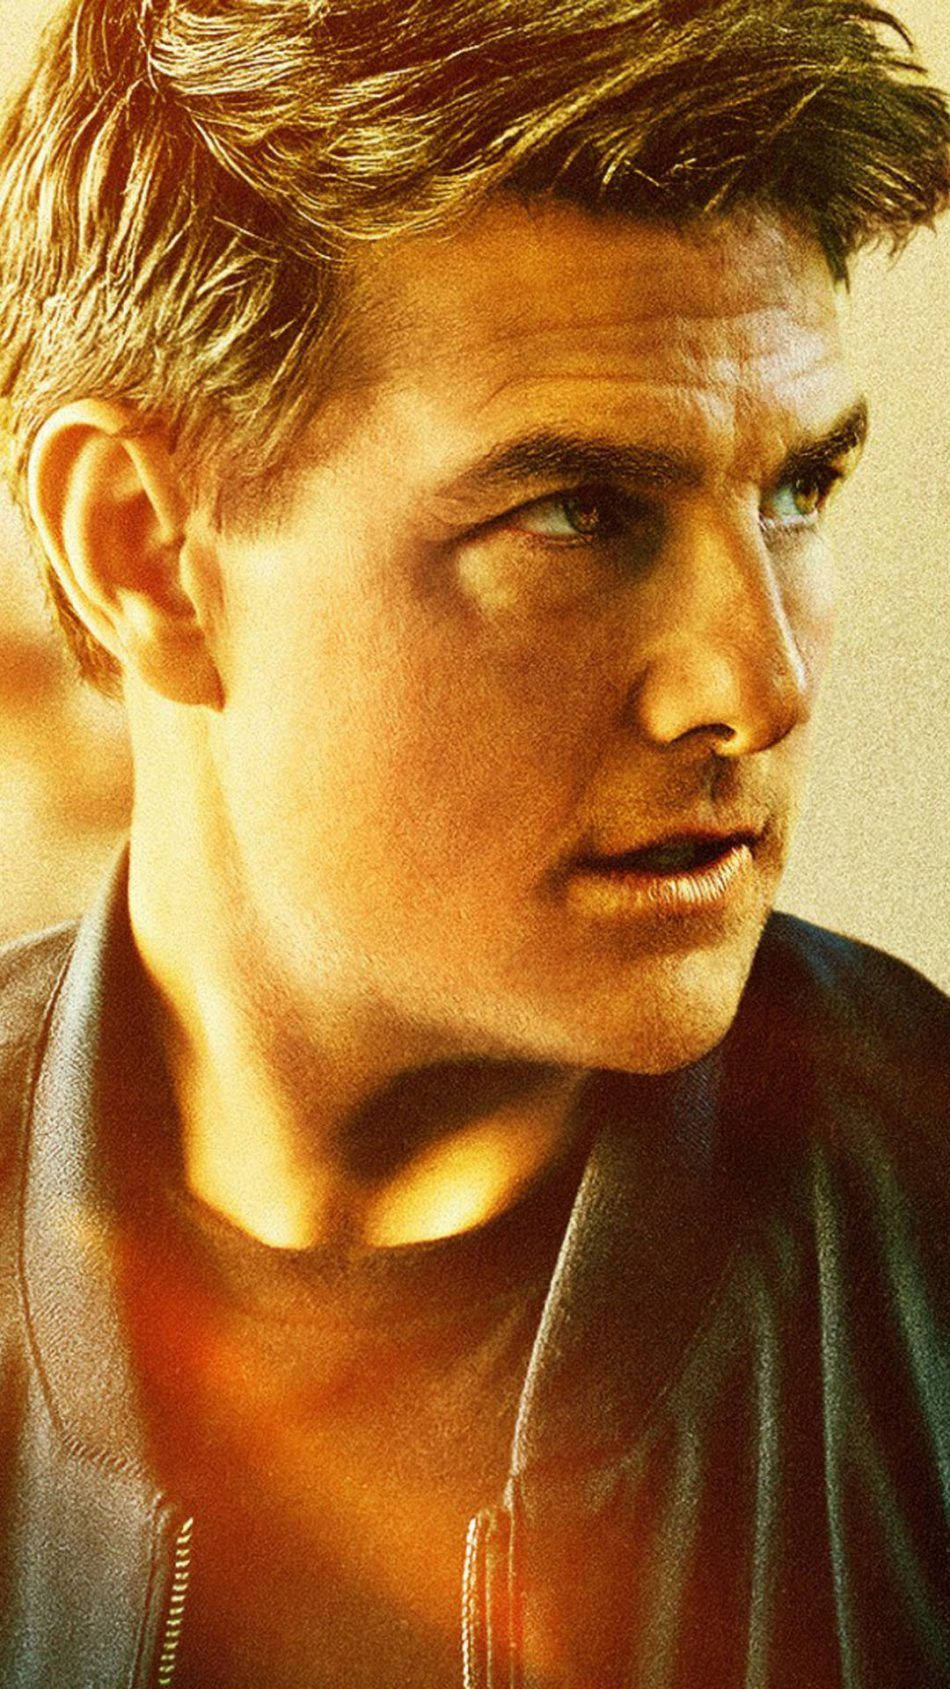 Tom Cruise In Mission Impossible Wallpaper